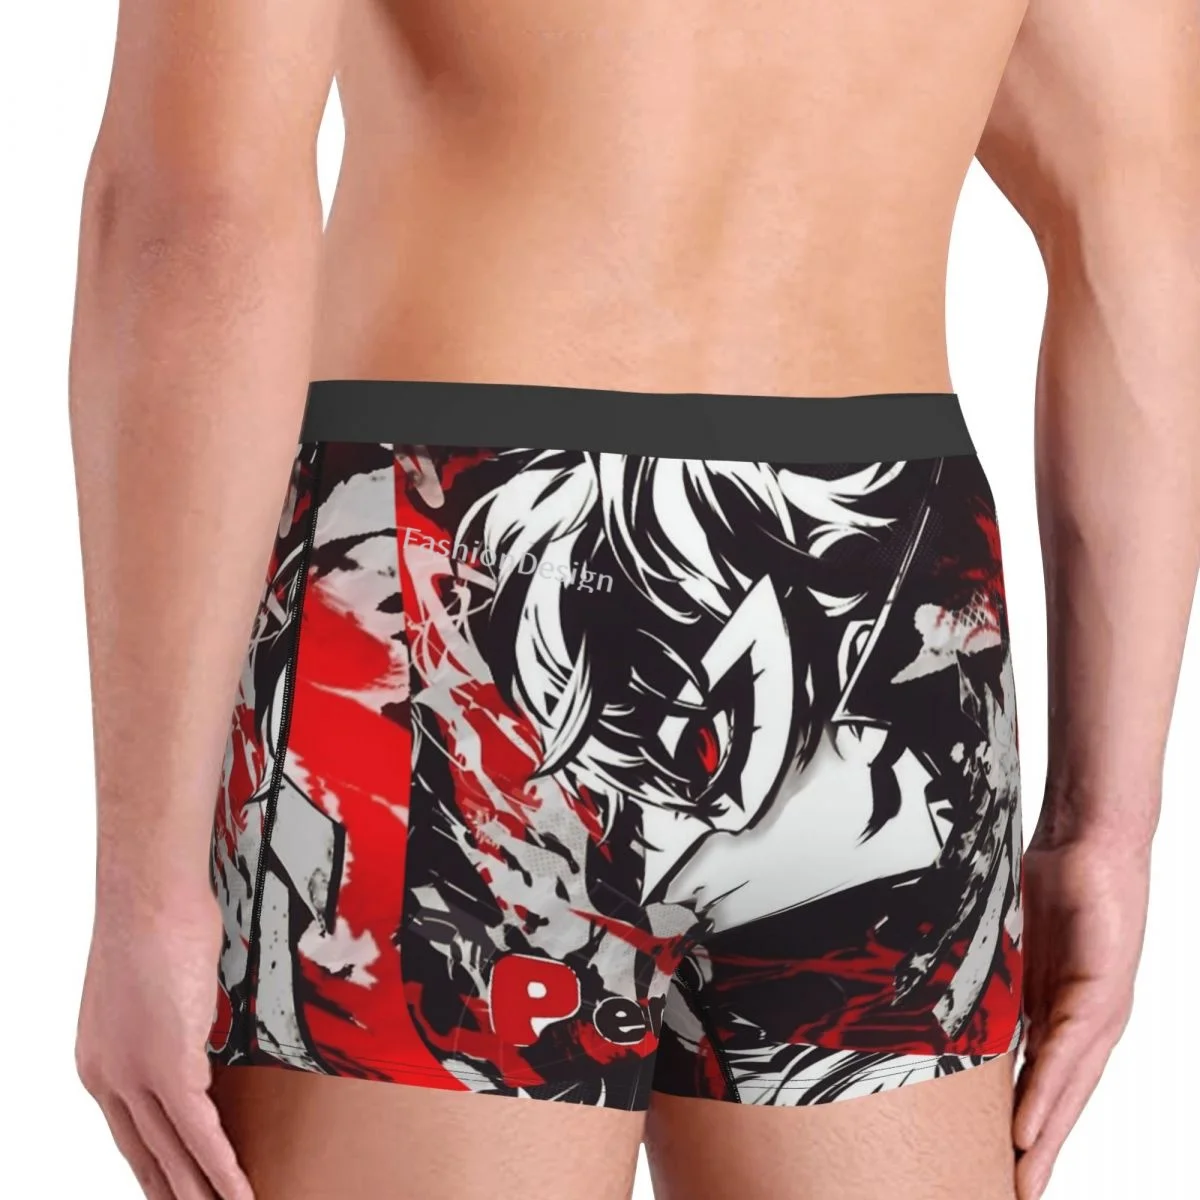 Persona 5 Morgana Game The Side Face Underpants Homme Panties Man Underwear Sexy Shorts Boxer Briefs images - 3